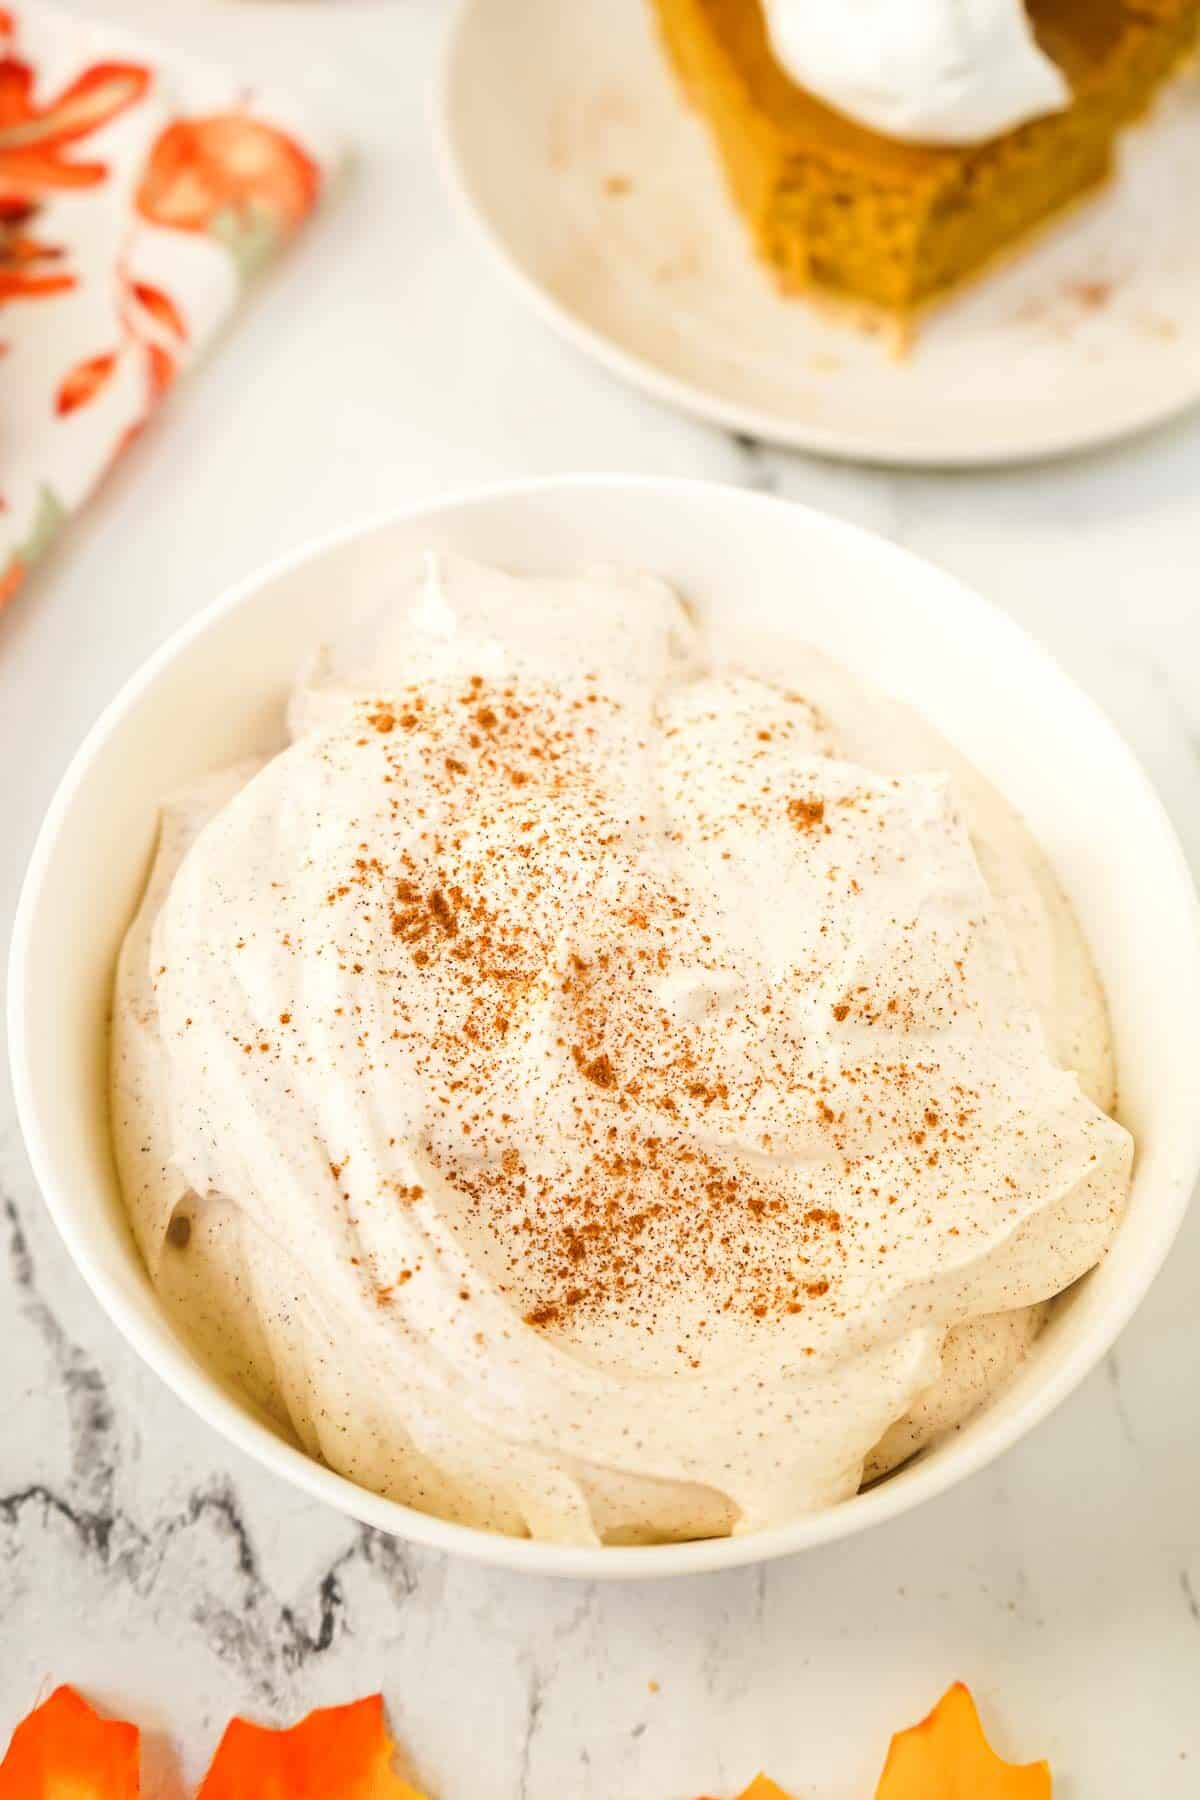 Cinnamon whipped cream in white bowl with cinnamon sprinkled on top.